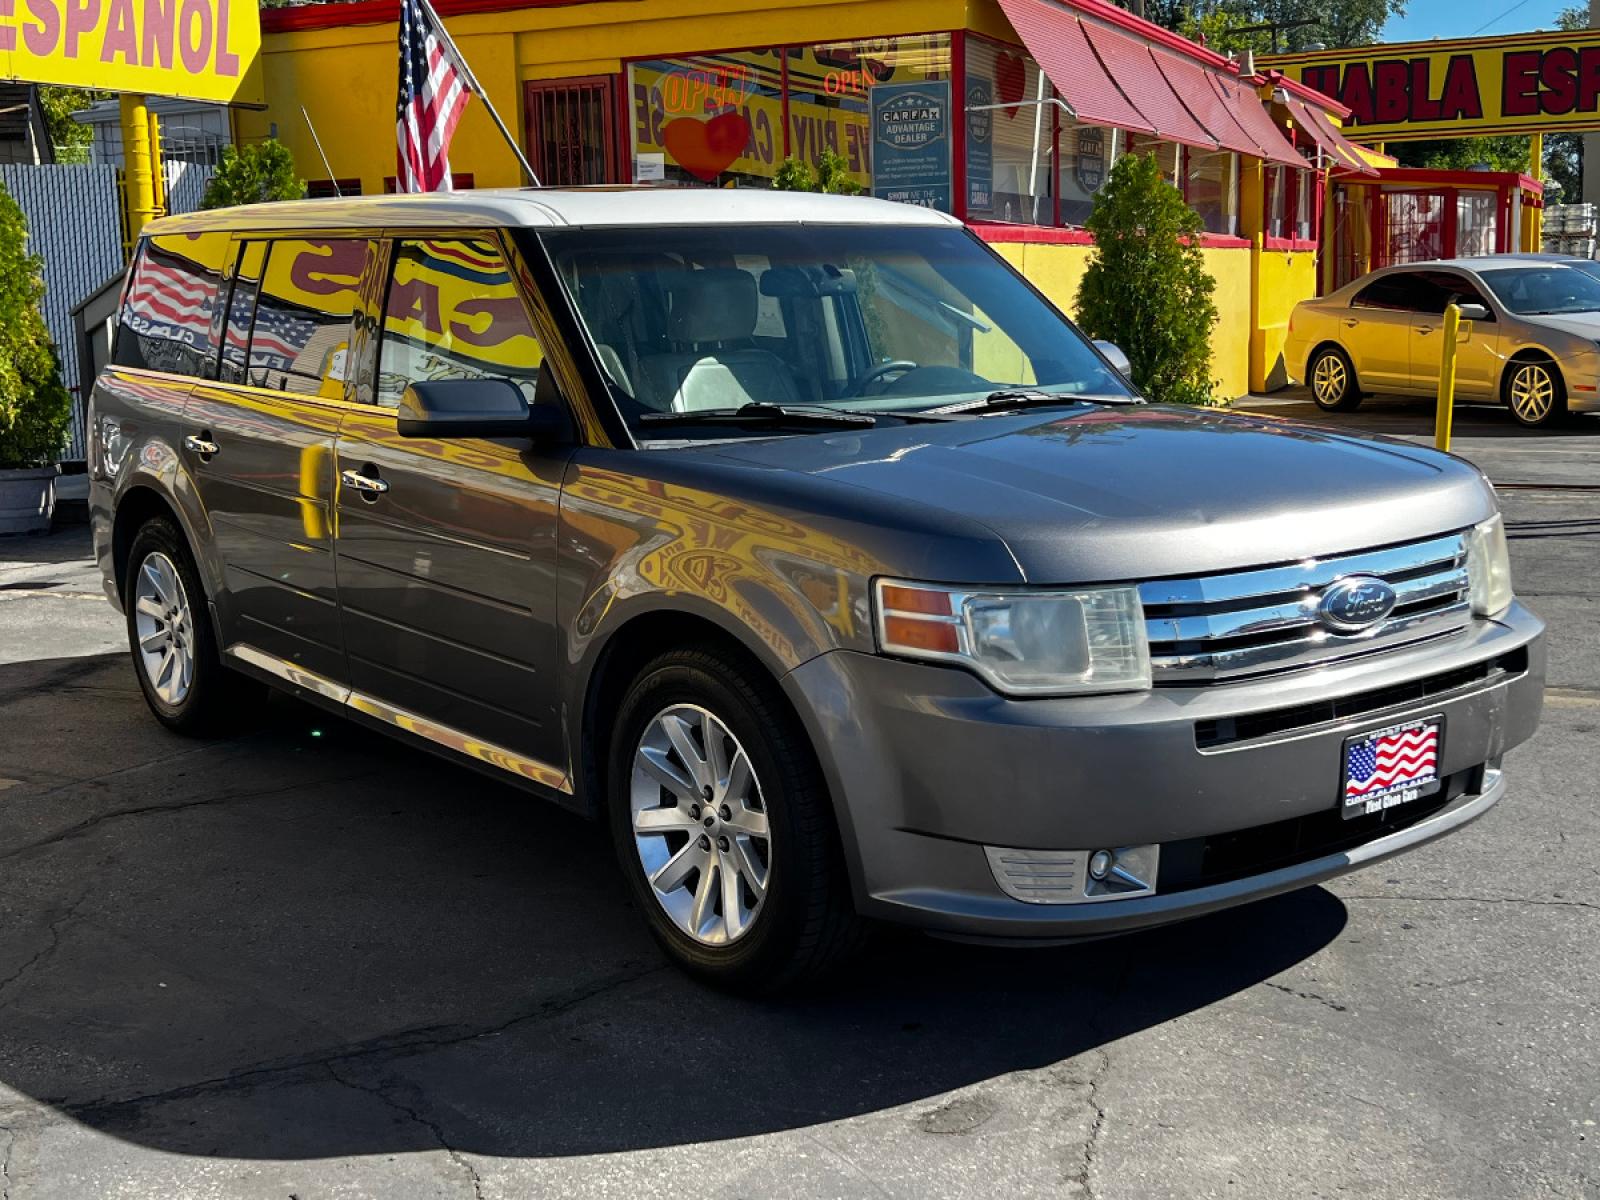 2009 Sterling Gray Metallic Ford Flex SEL (2FMDK52C49B) with an 3.5L V6 engine, Automatic transmission, located at 801 South State Street, Salt Lake City, UT, 84111, (801) 328-0098, 40.751953, -111.888206 - Life is crazy. Now is the time to buy! All of our prices are just dollars above our cost. These prices will change as soon as life isn't so crazy. So please call or come in. We are here to save you a lot of money! Our service department is OPEN DAILY to help with any of your service needs. P - Photo #4